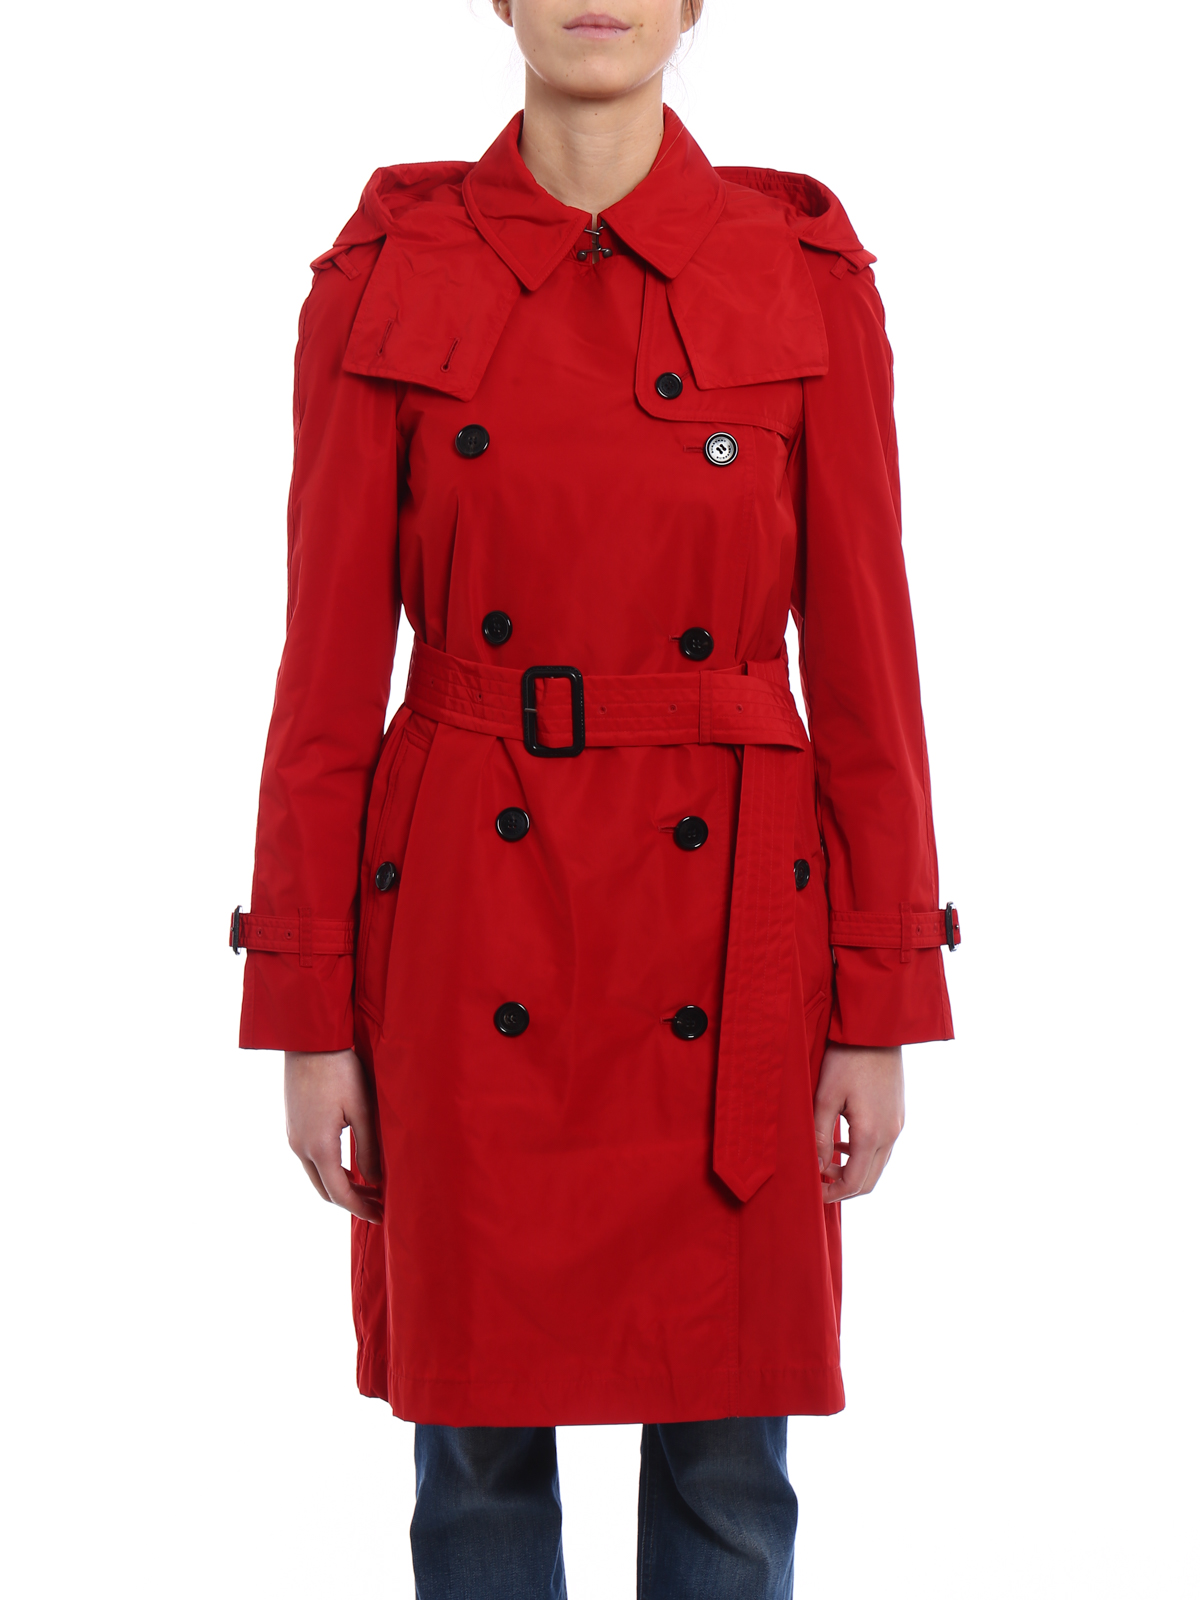 Burberry Amberford Trench | vlr.eng.br